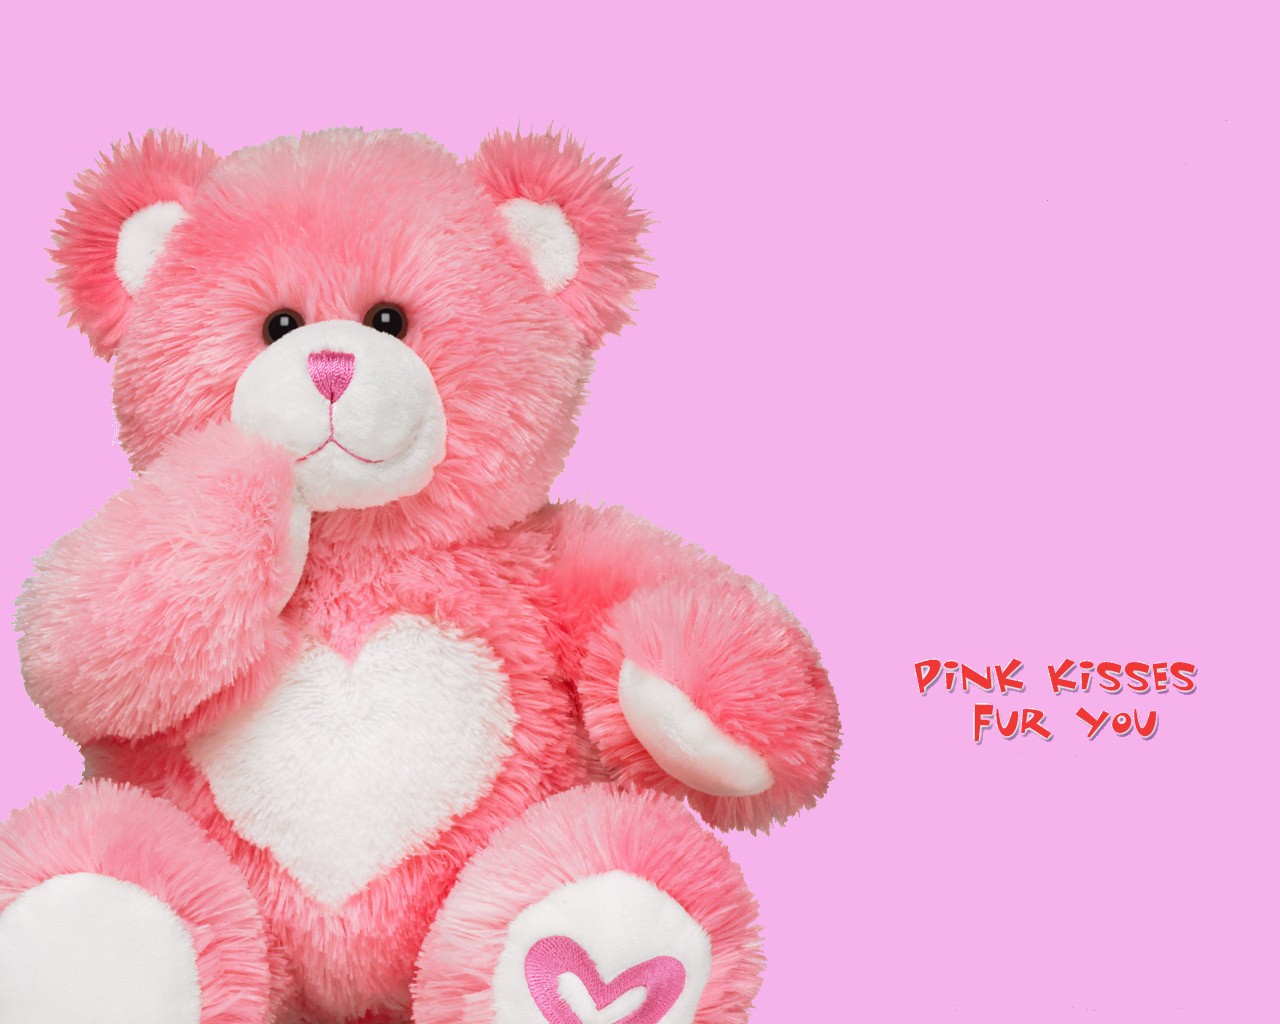 images of cute teddy bears with quotes